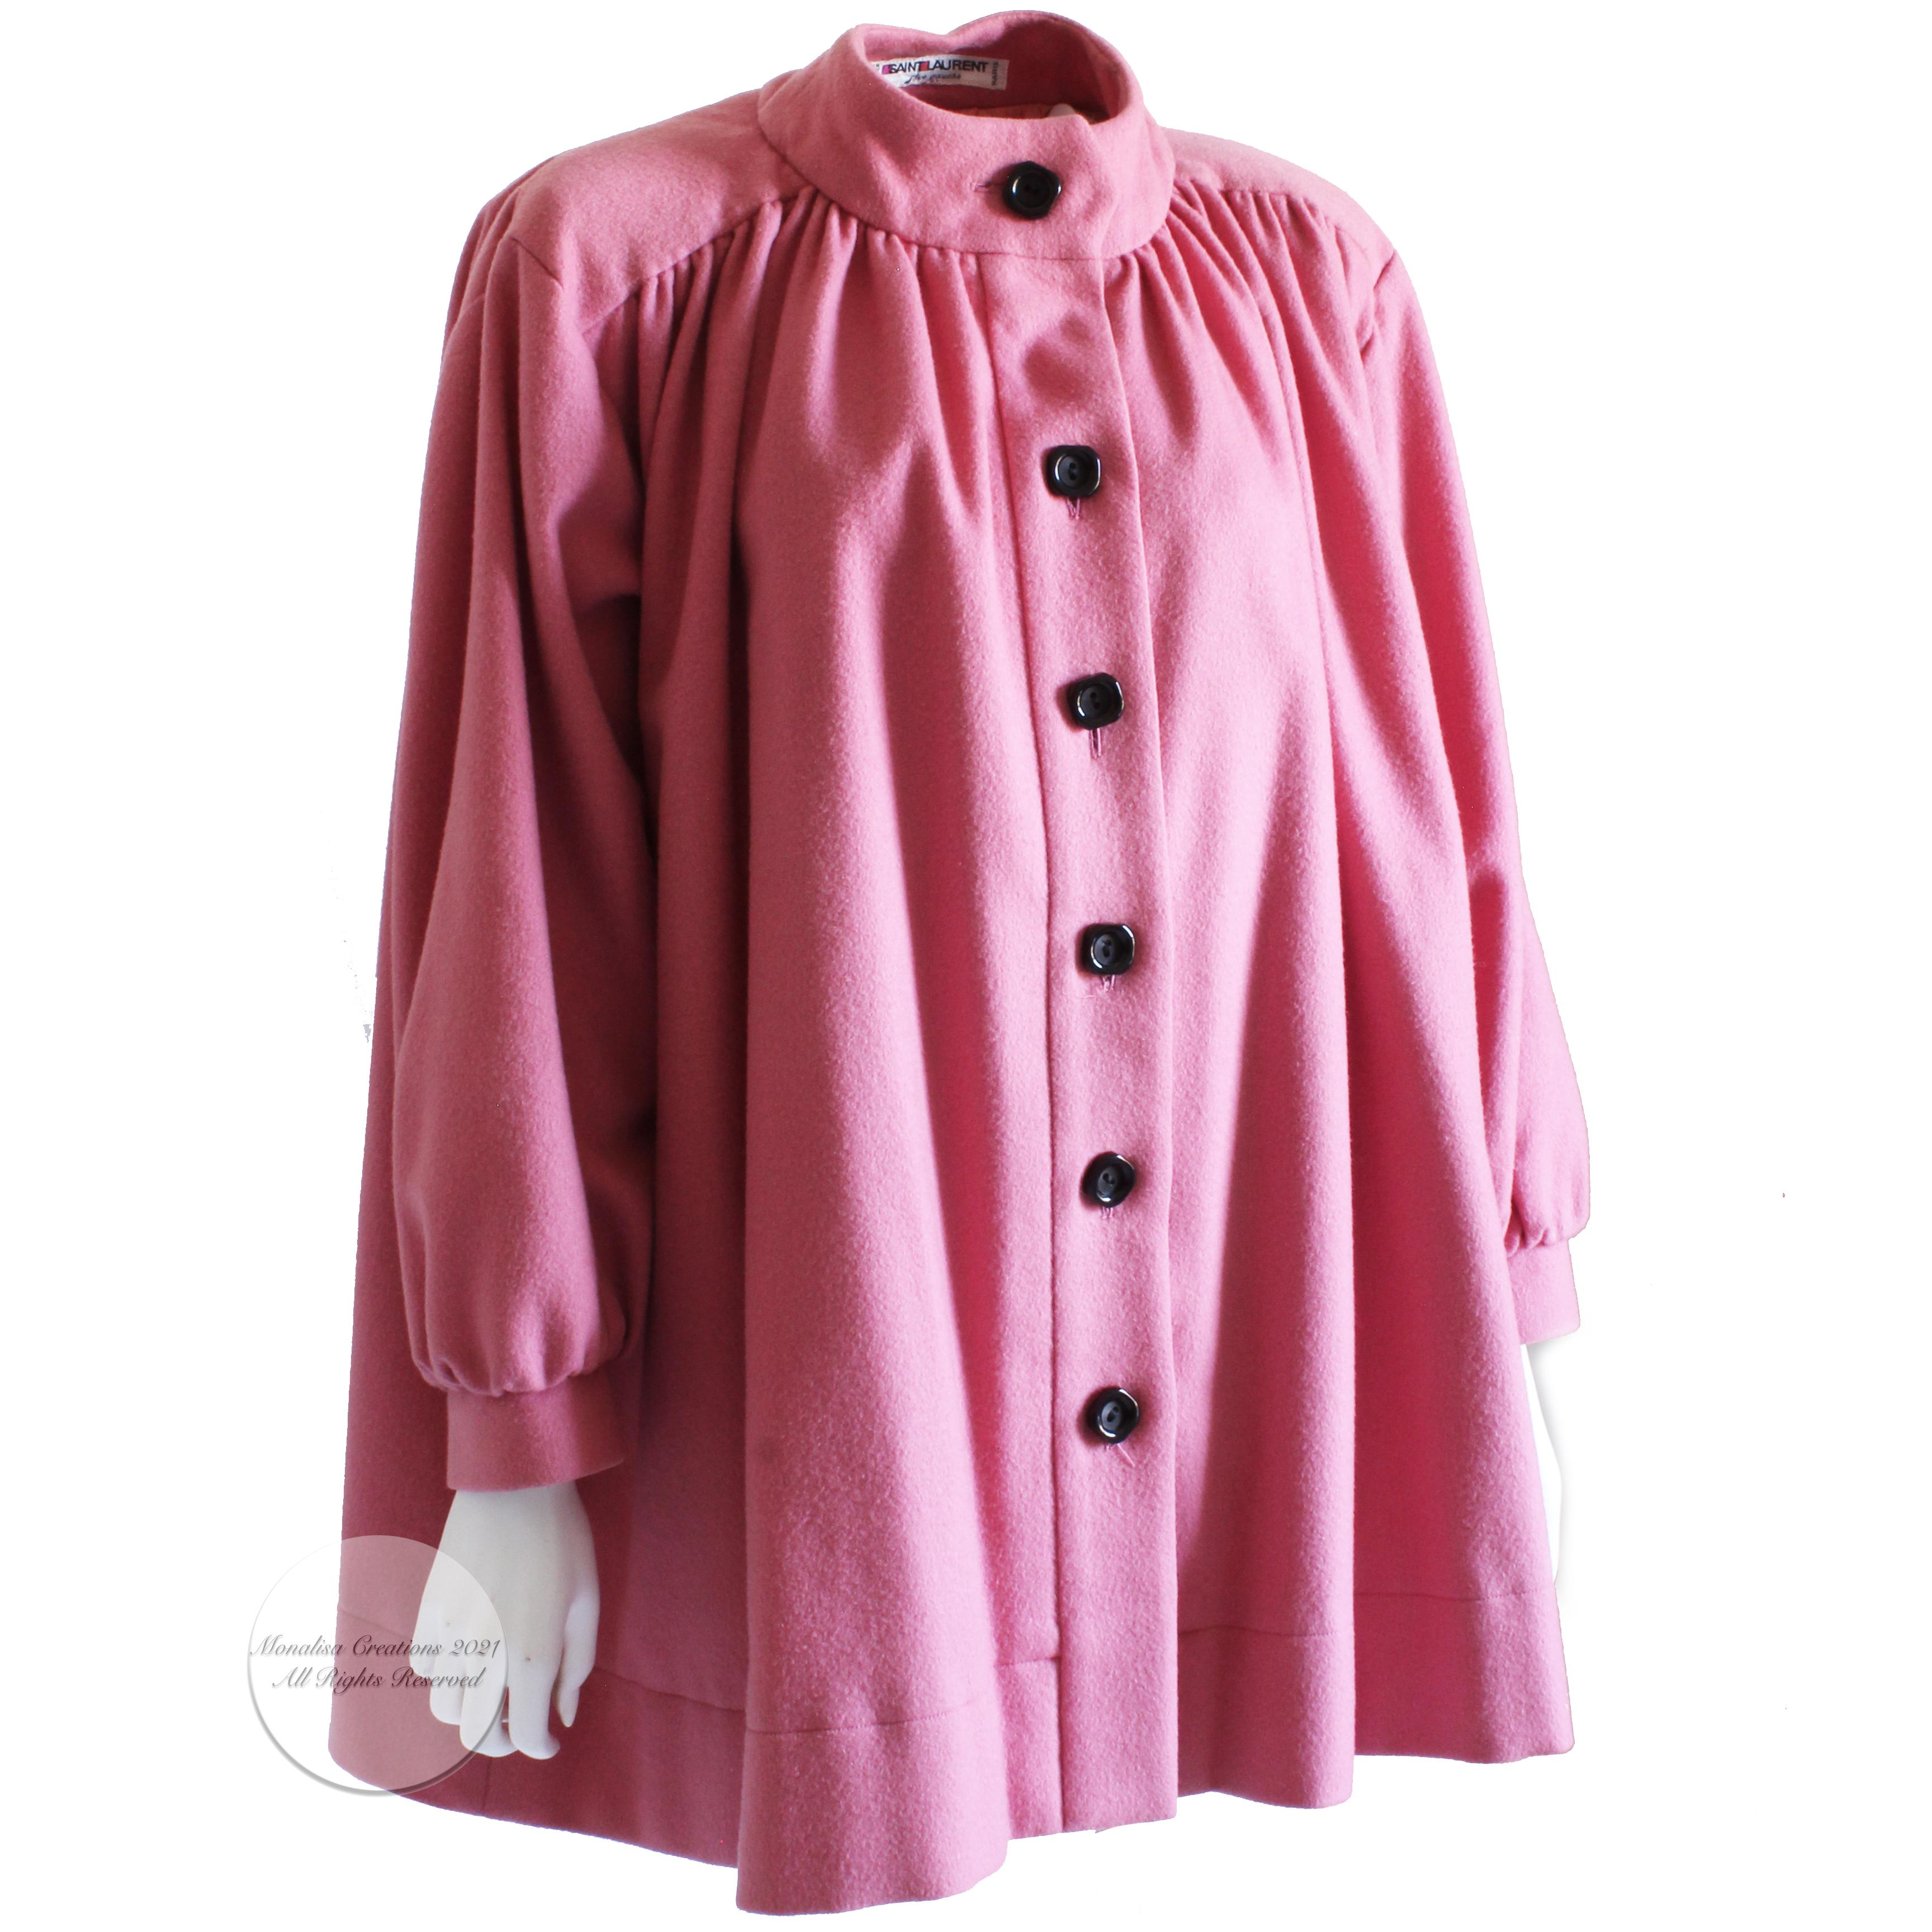 Authentic, preowned, vintage Yves Saint Laurent peasant-style swing jacket or coat in pink wool, from S/S'85. Fully-lined, it features balloon sleeves and gathers at collar and back.  

Gorgeous pink wool coat and so hard to find nowadays.

Made in